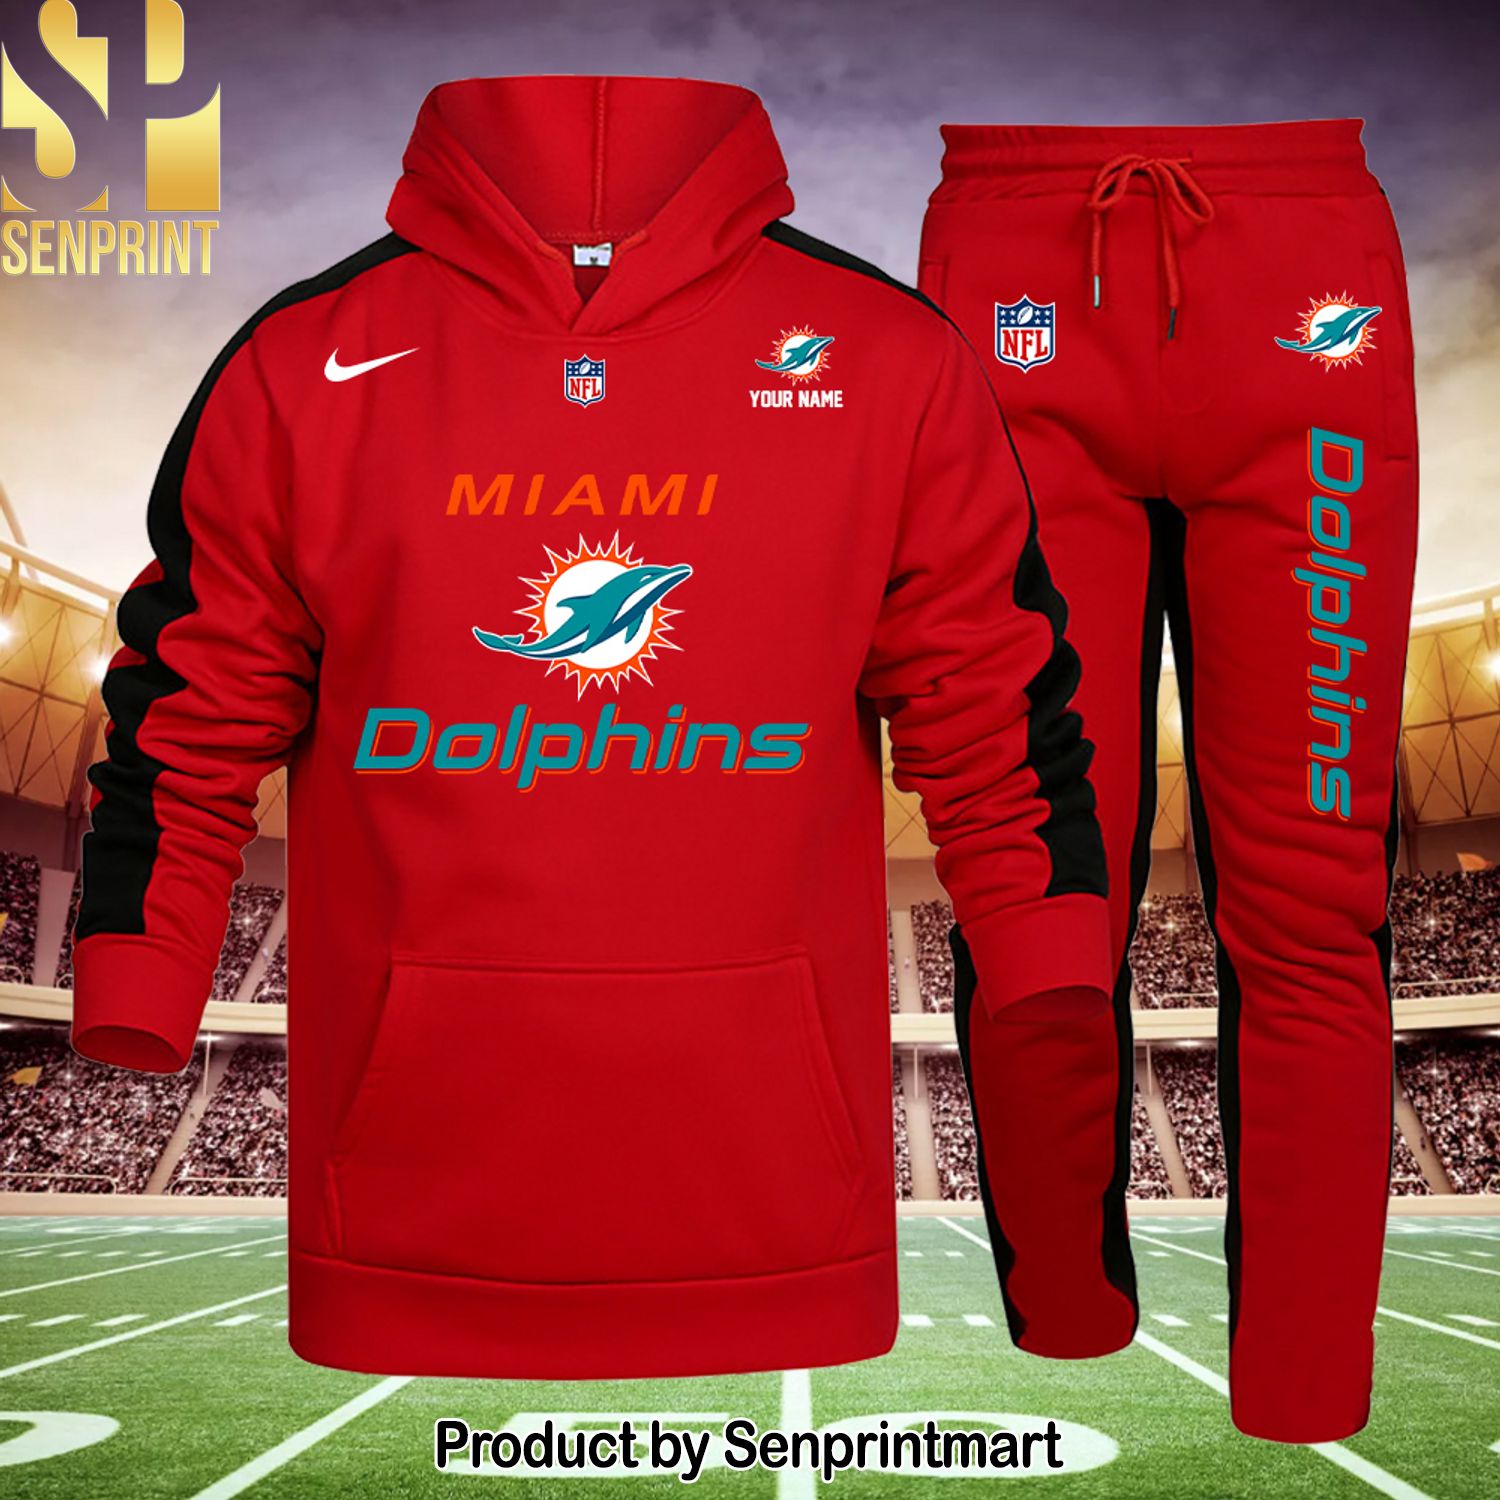 Miami Dolphins Awesome Outfit Shirt and Pants